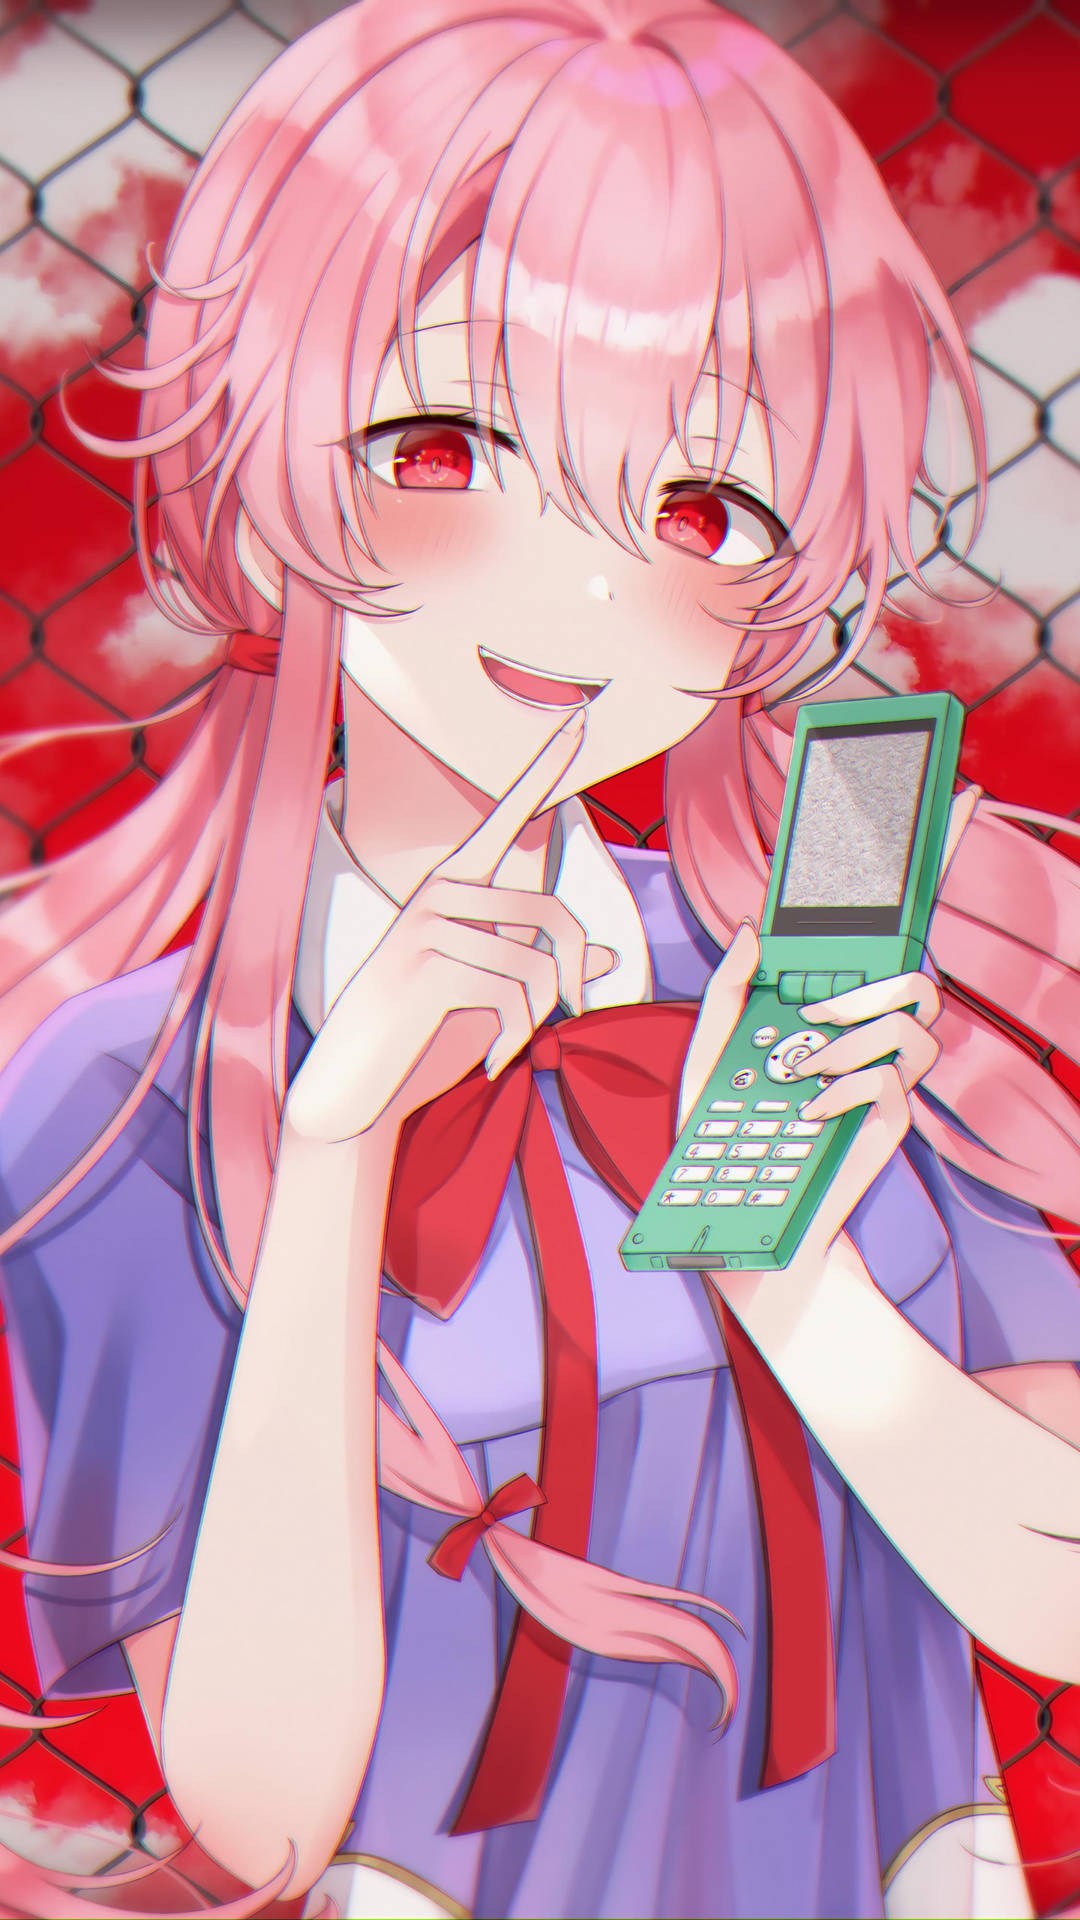 Fashionably lethal - Yuno Gasai holding her signature pink cellphone. Wallpaper